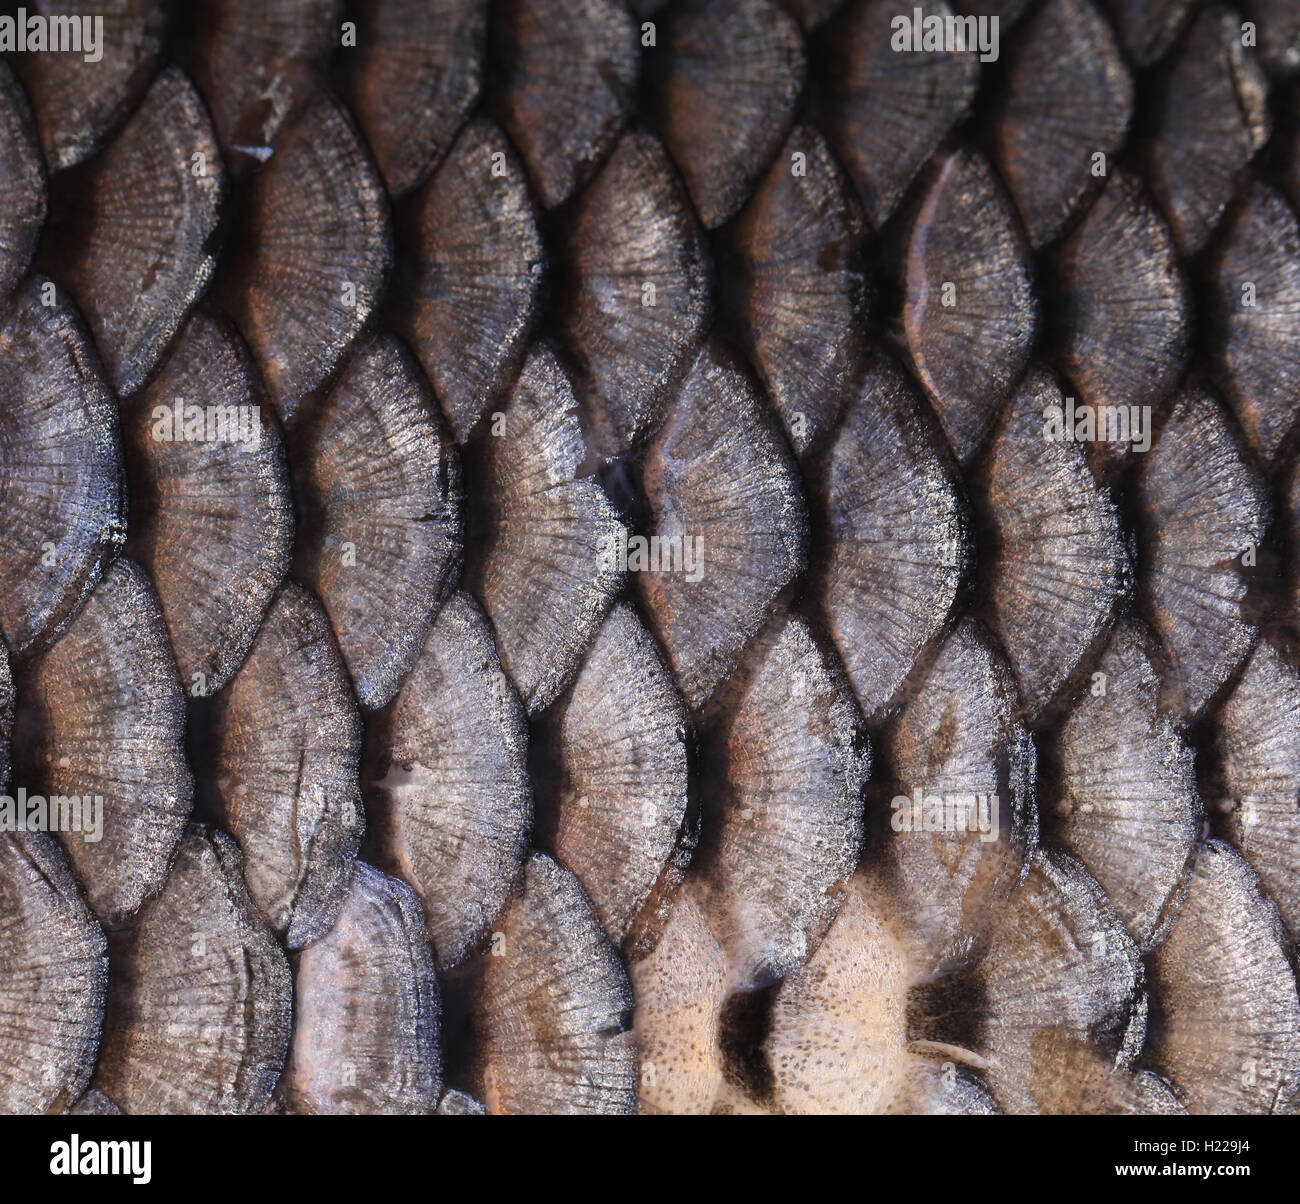 Texture of fish scales close up Stock Photo - Alamy